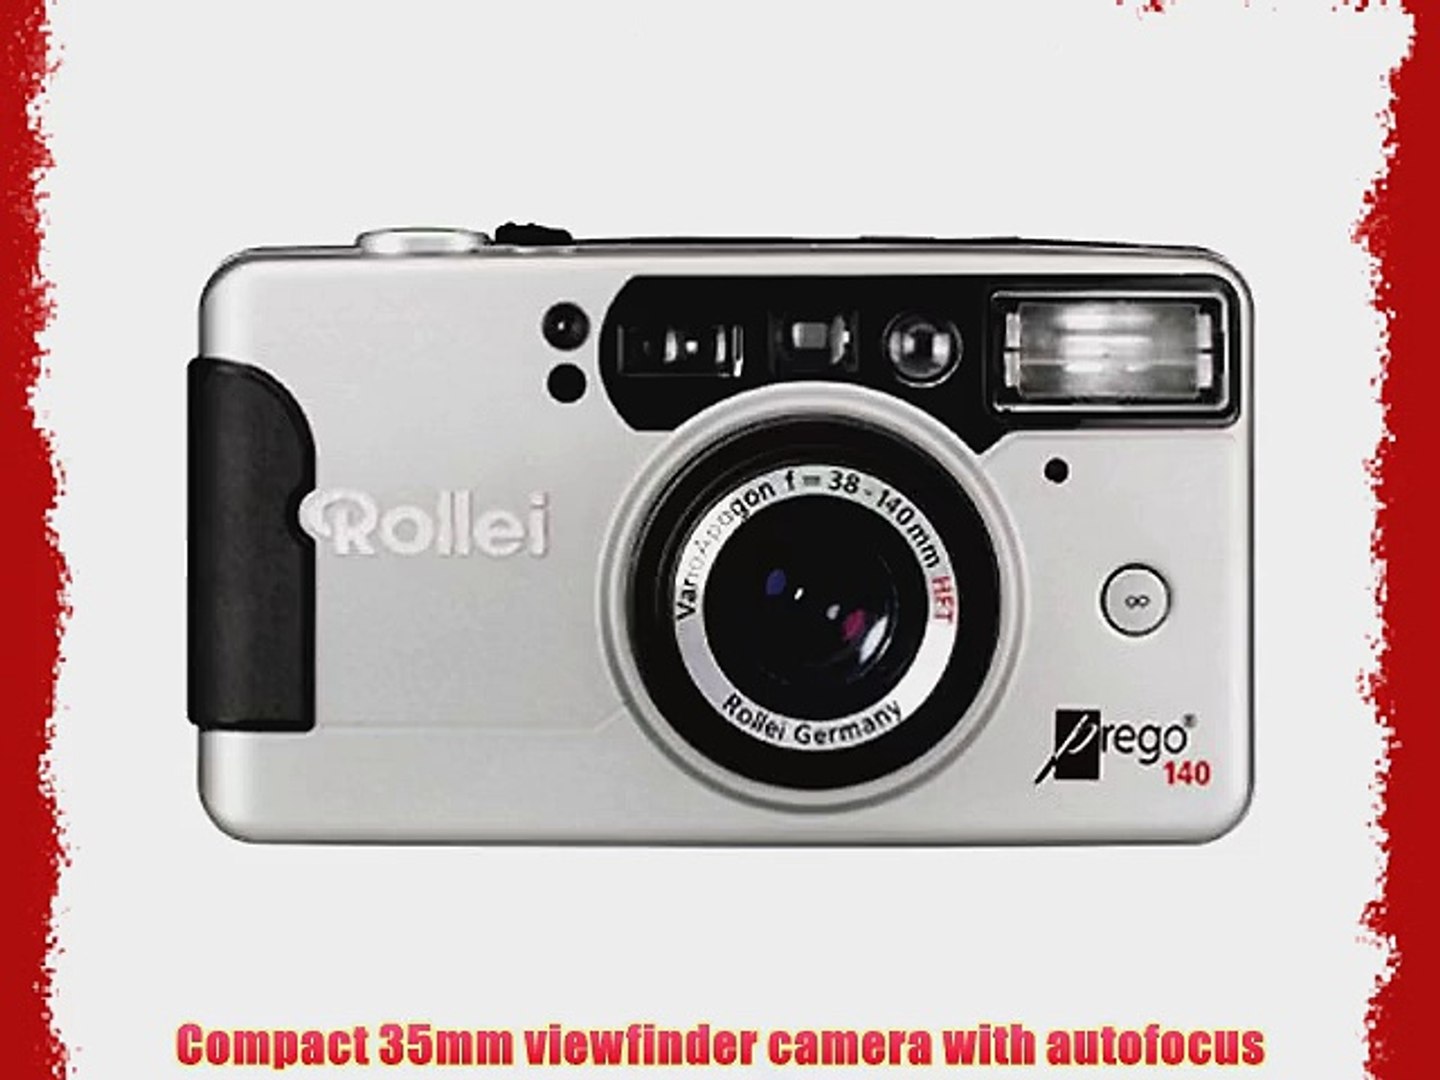 Rollei Prego 140mm Zoom 35mm Camera - video Dailymotion